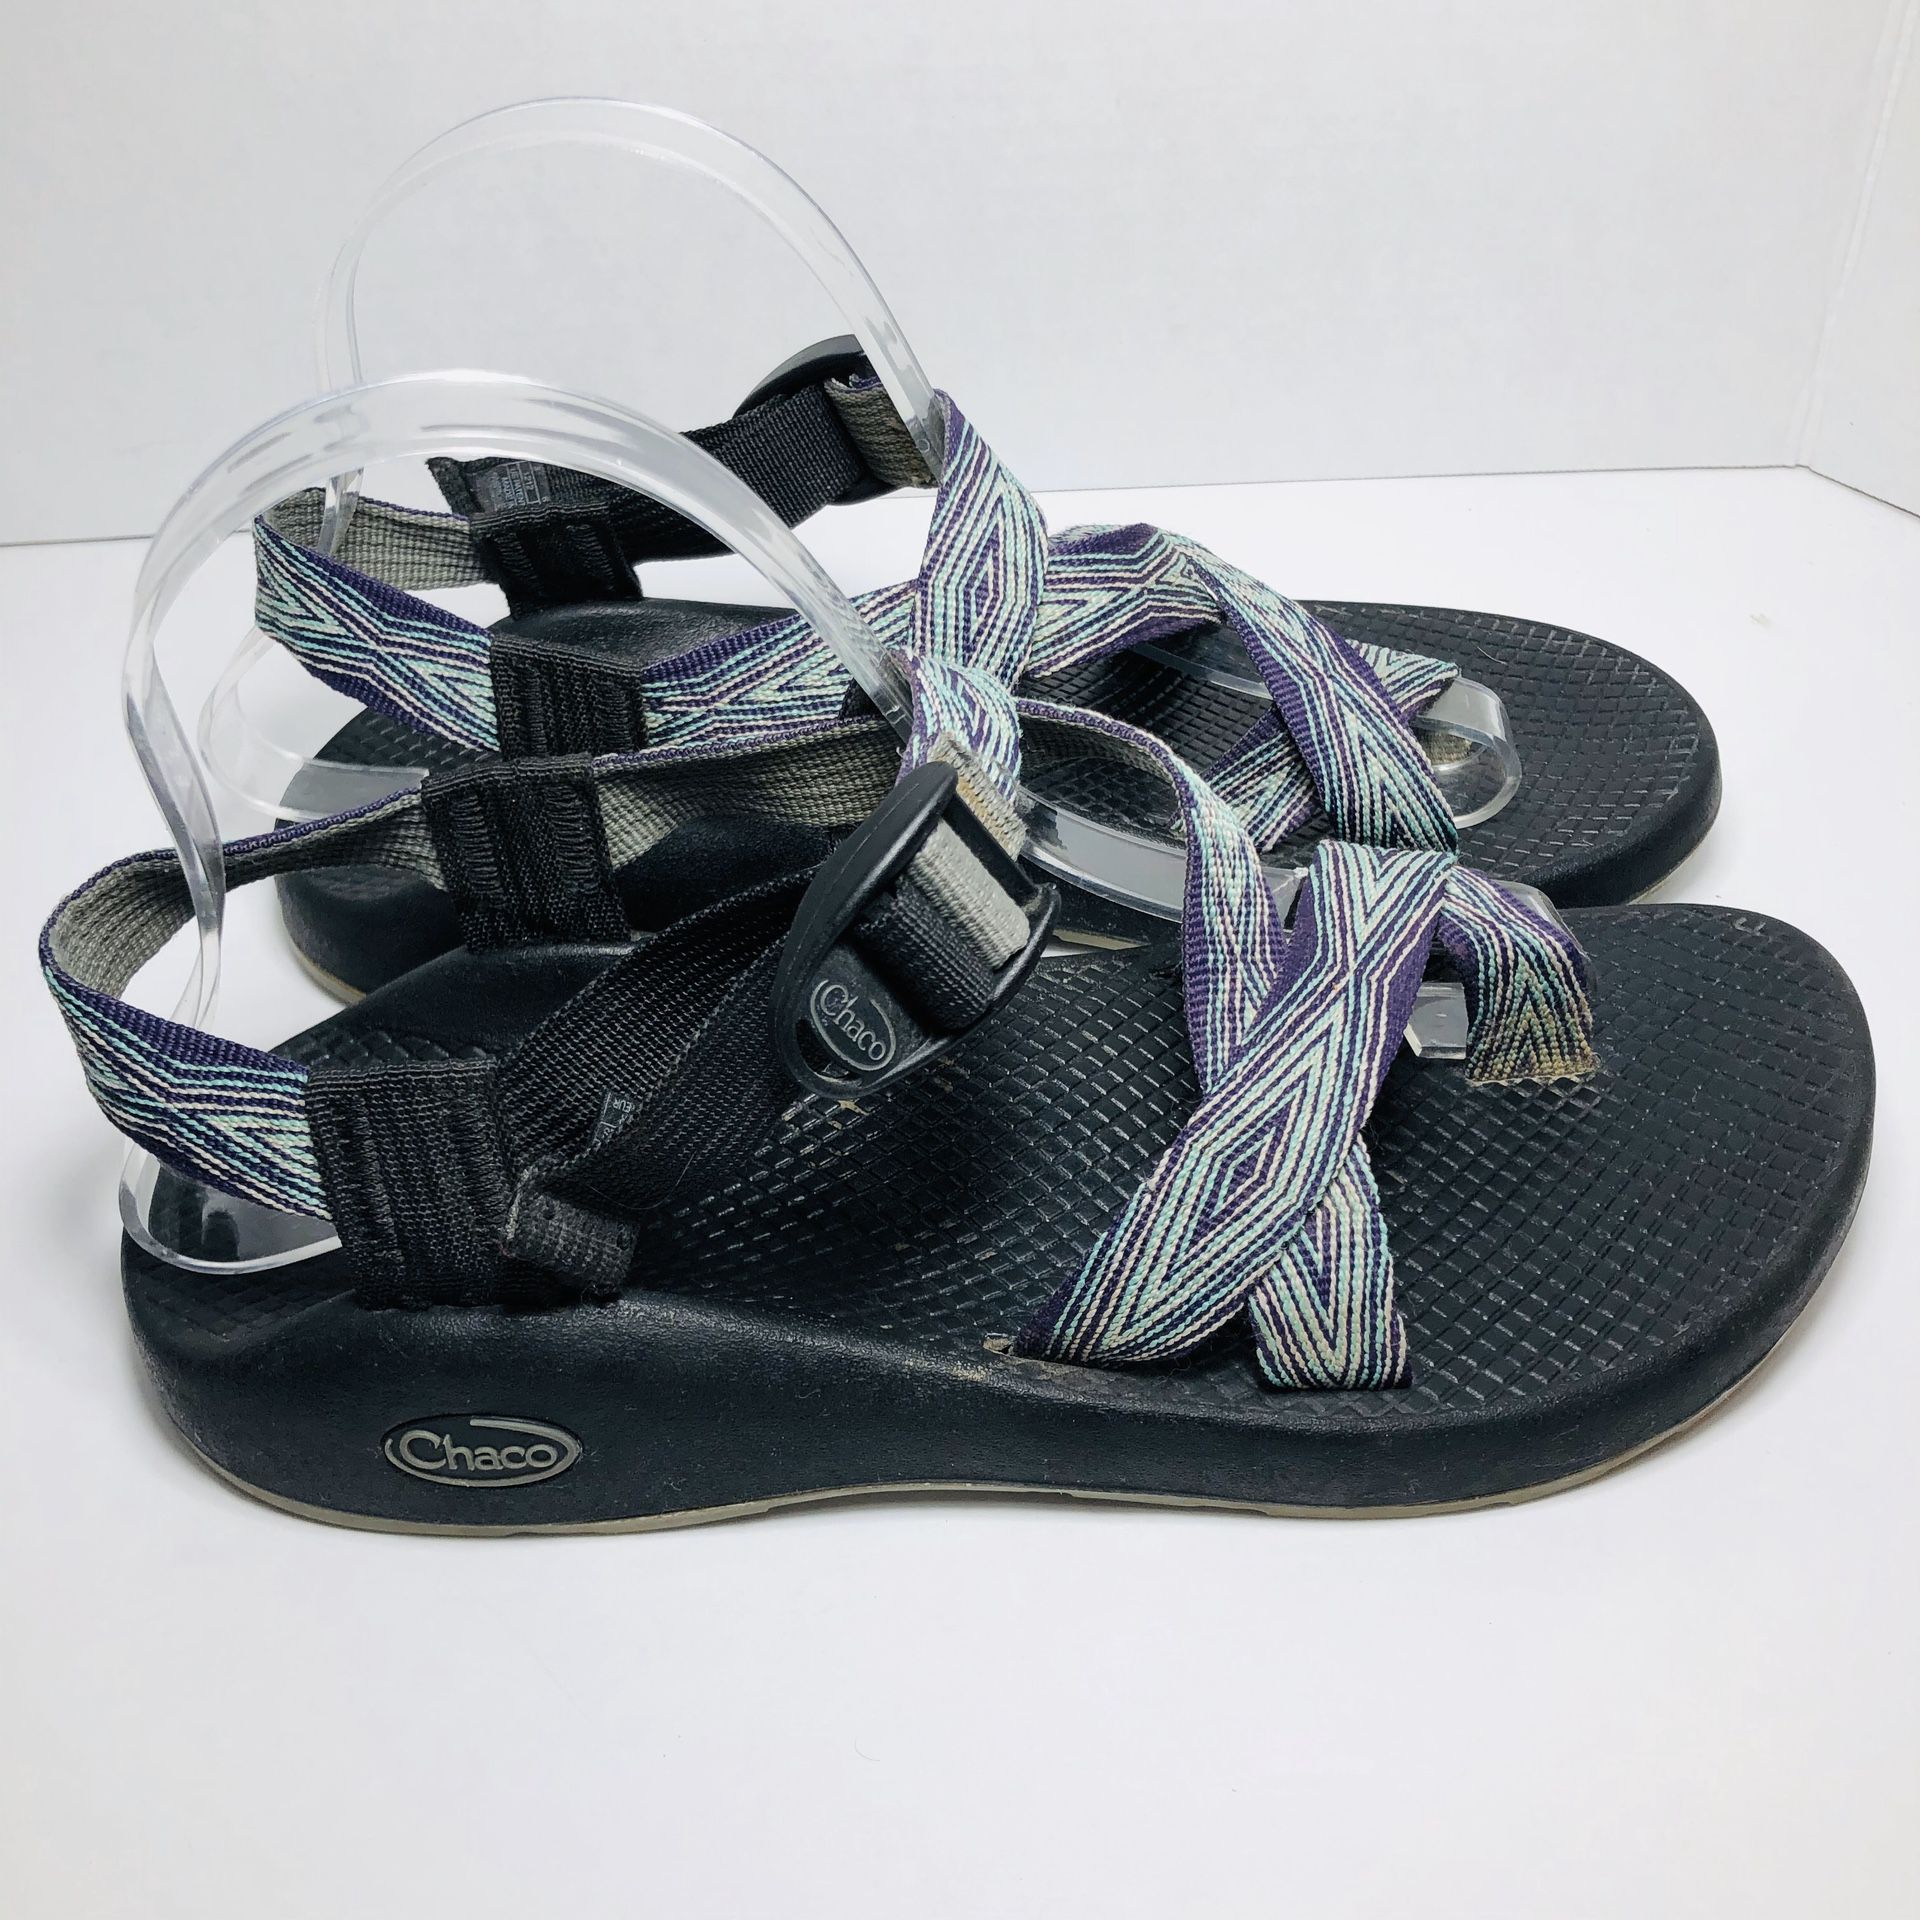 Chaco Z2 Yampa Womens 8 Sandals Toe Loop Purple Teal Beach Vibram Ankle Strap